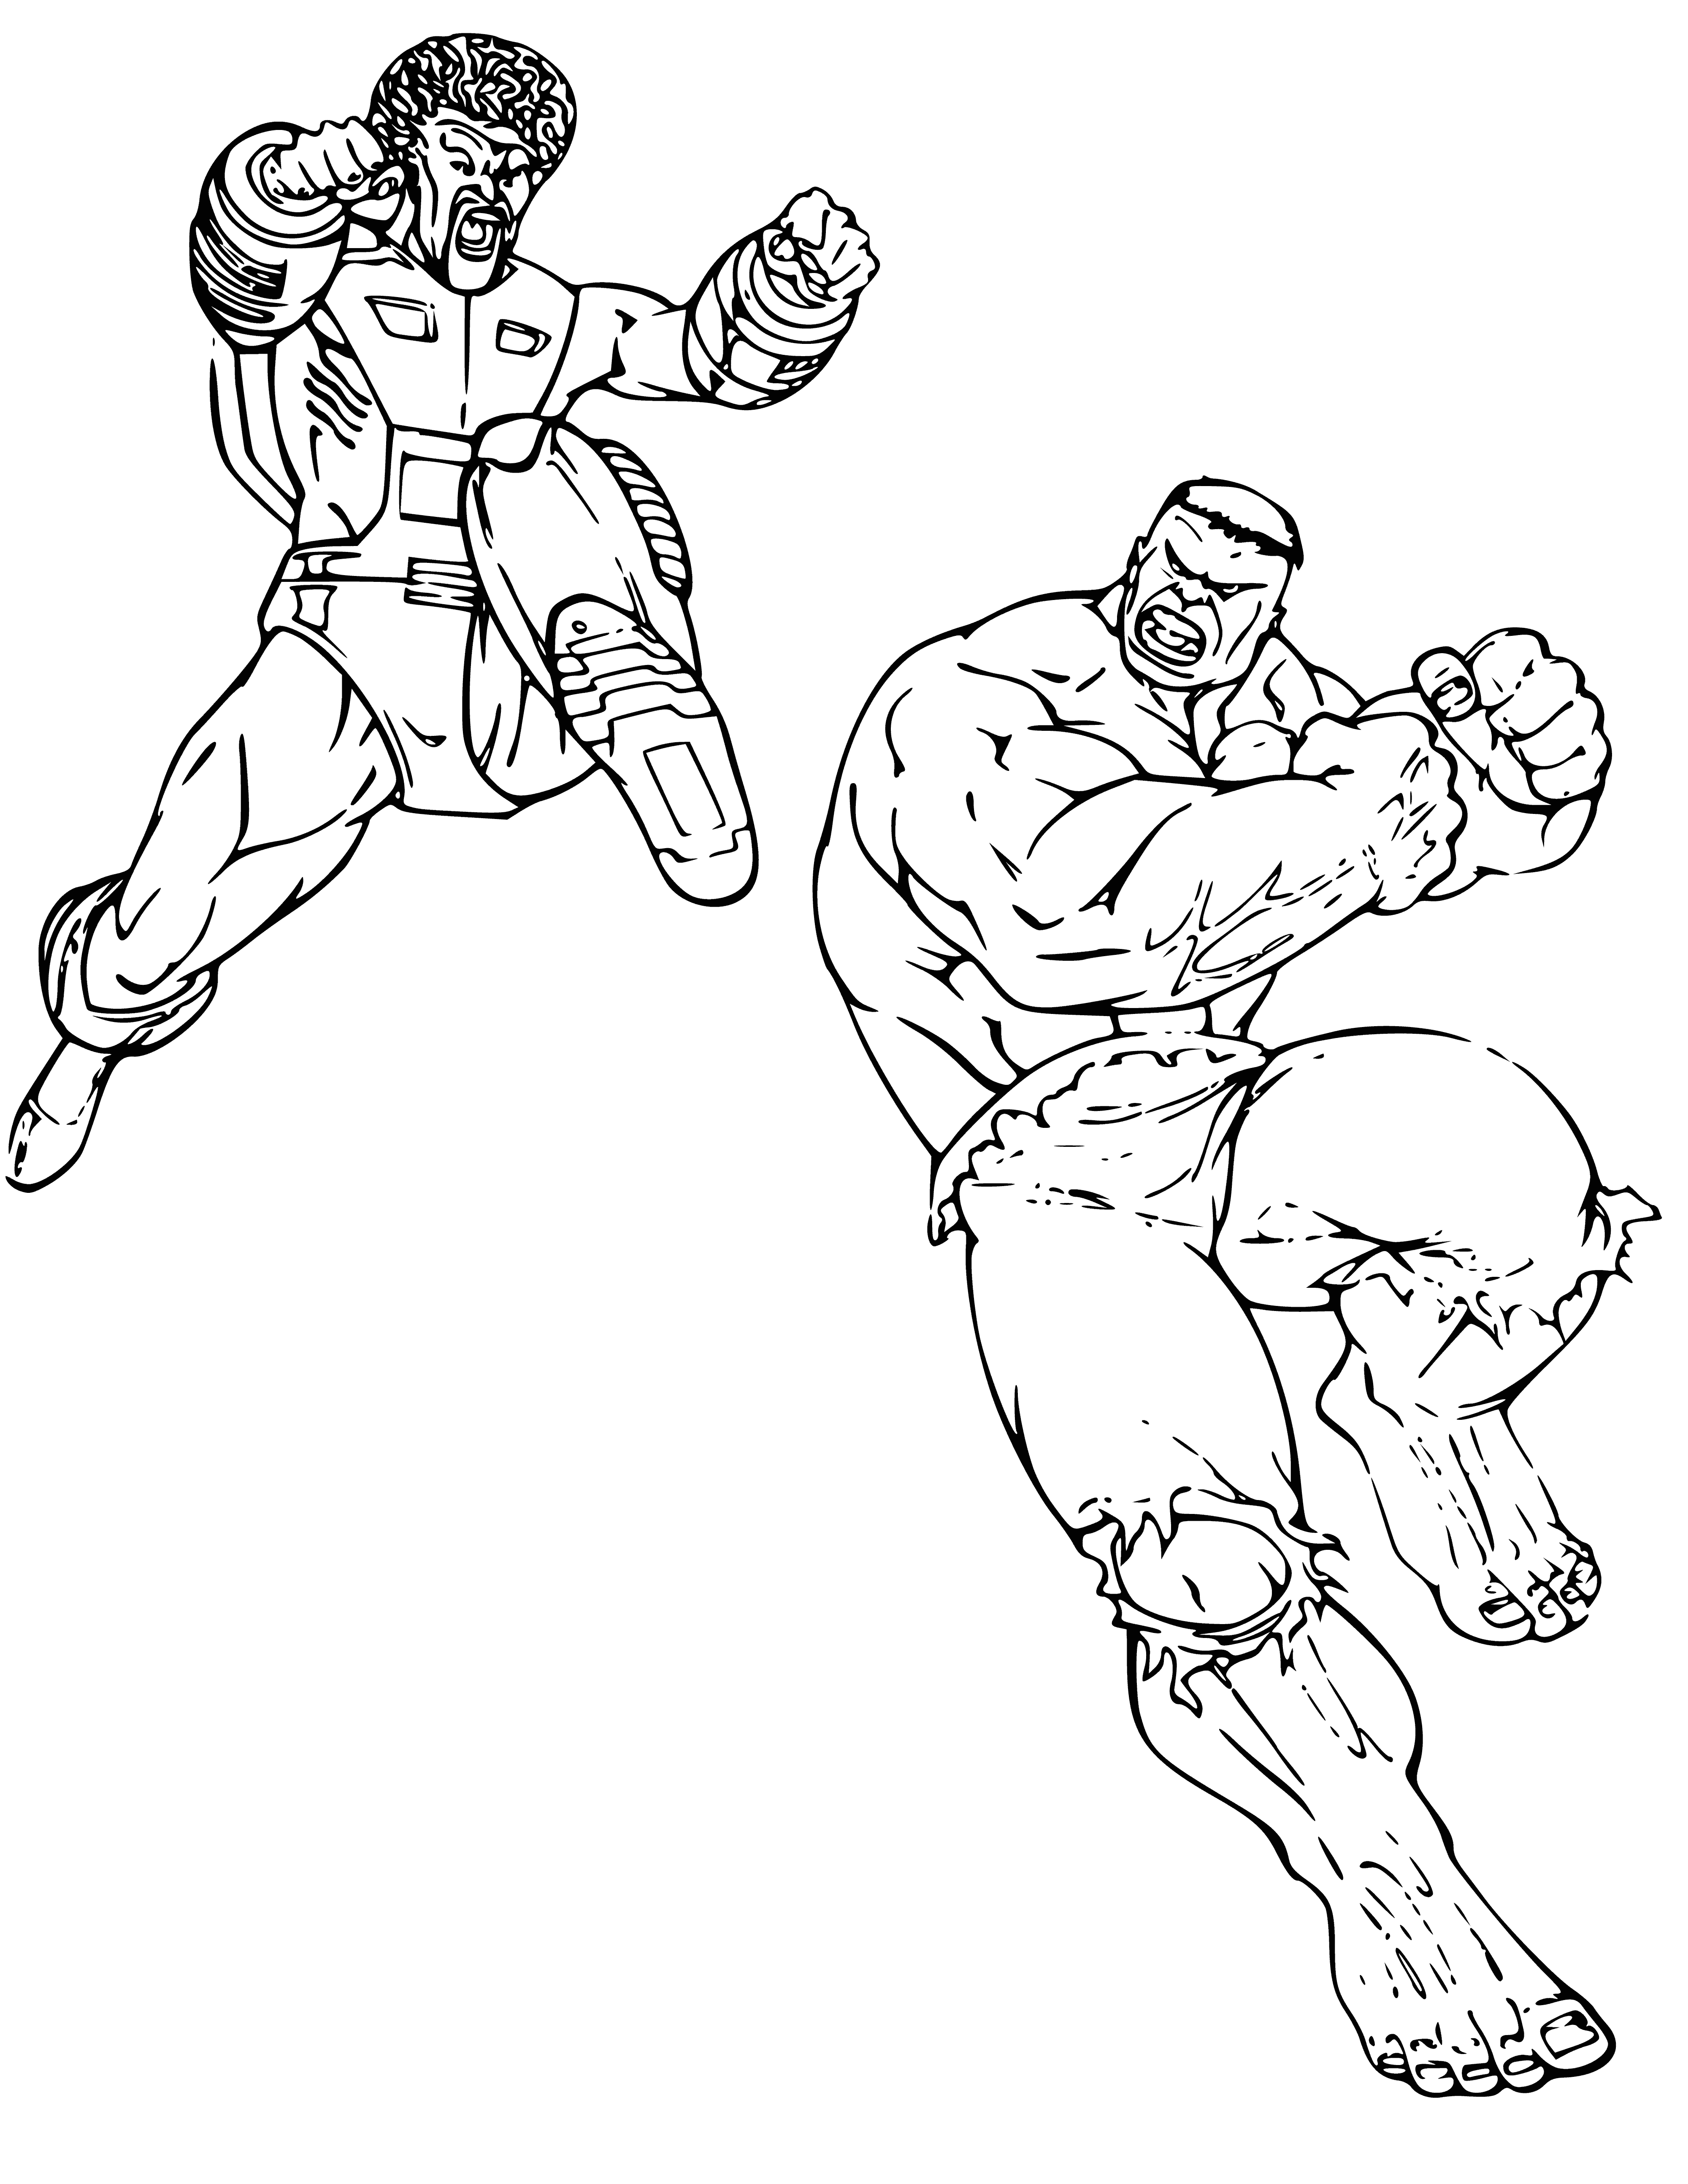 coloring page: The Hulk is a giant green monster with super strength. He's an Avengers hero and enemy of S.H.I.E.L.D.